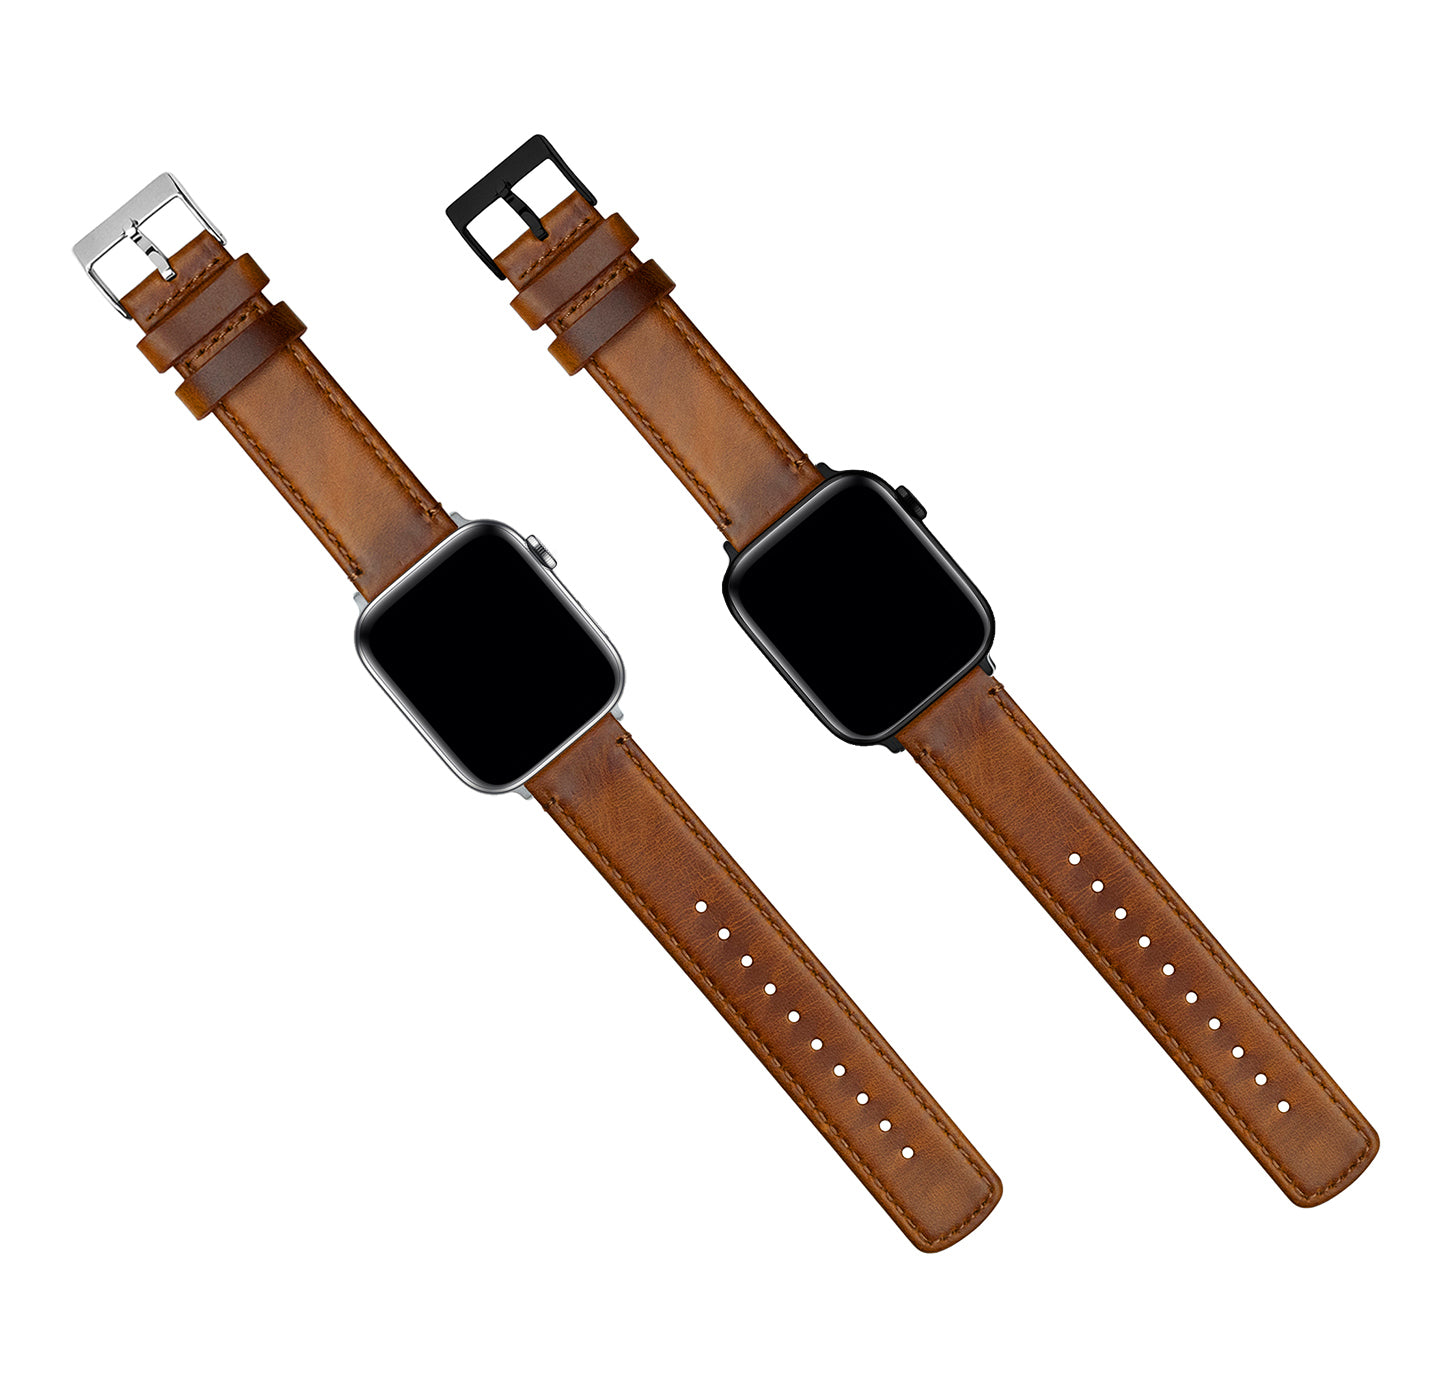 Apple Watch Weathered Brown Leather Watch Band